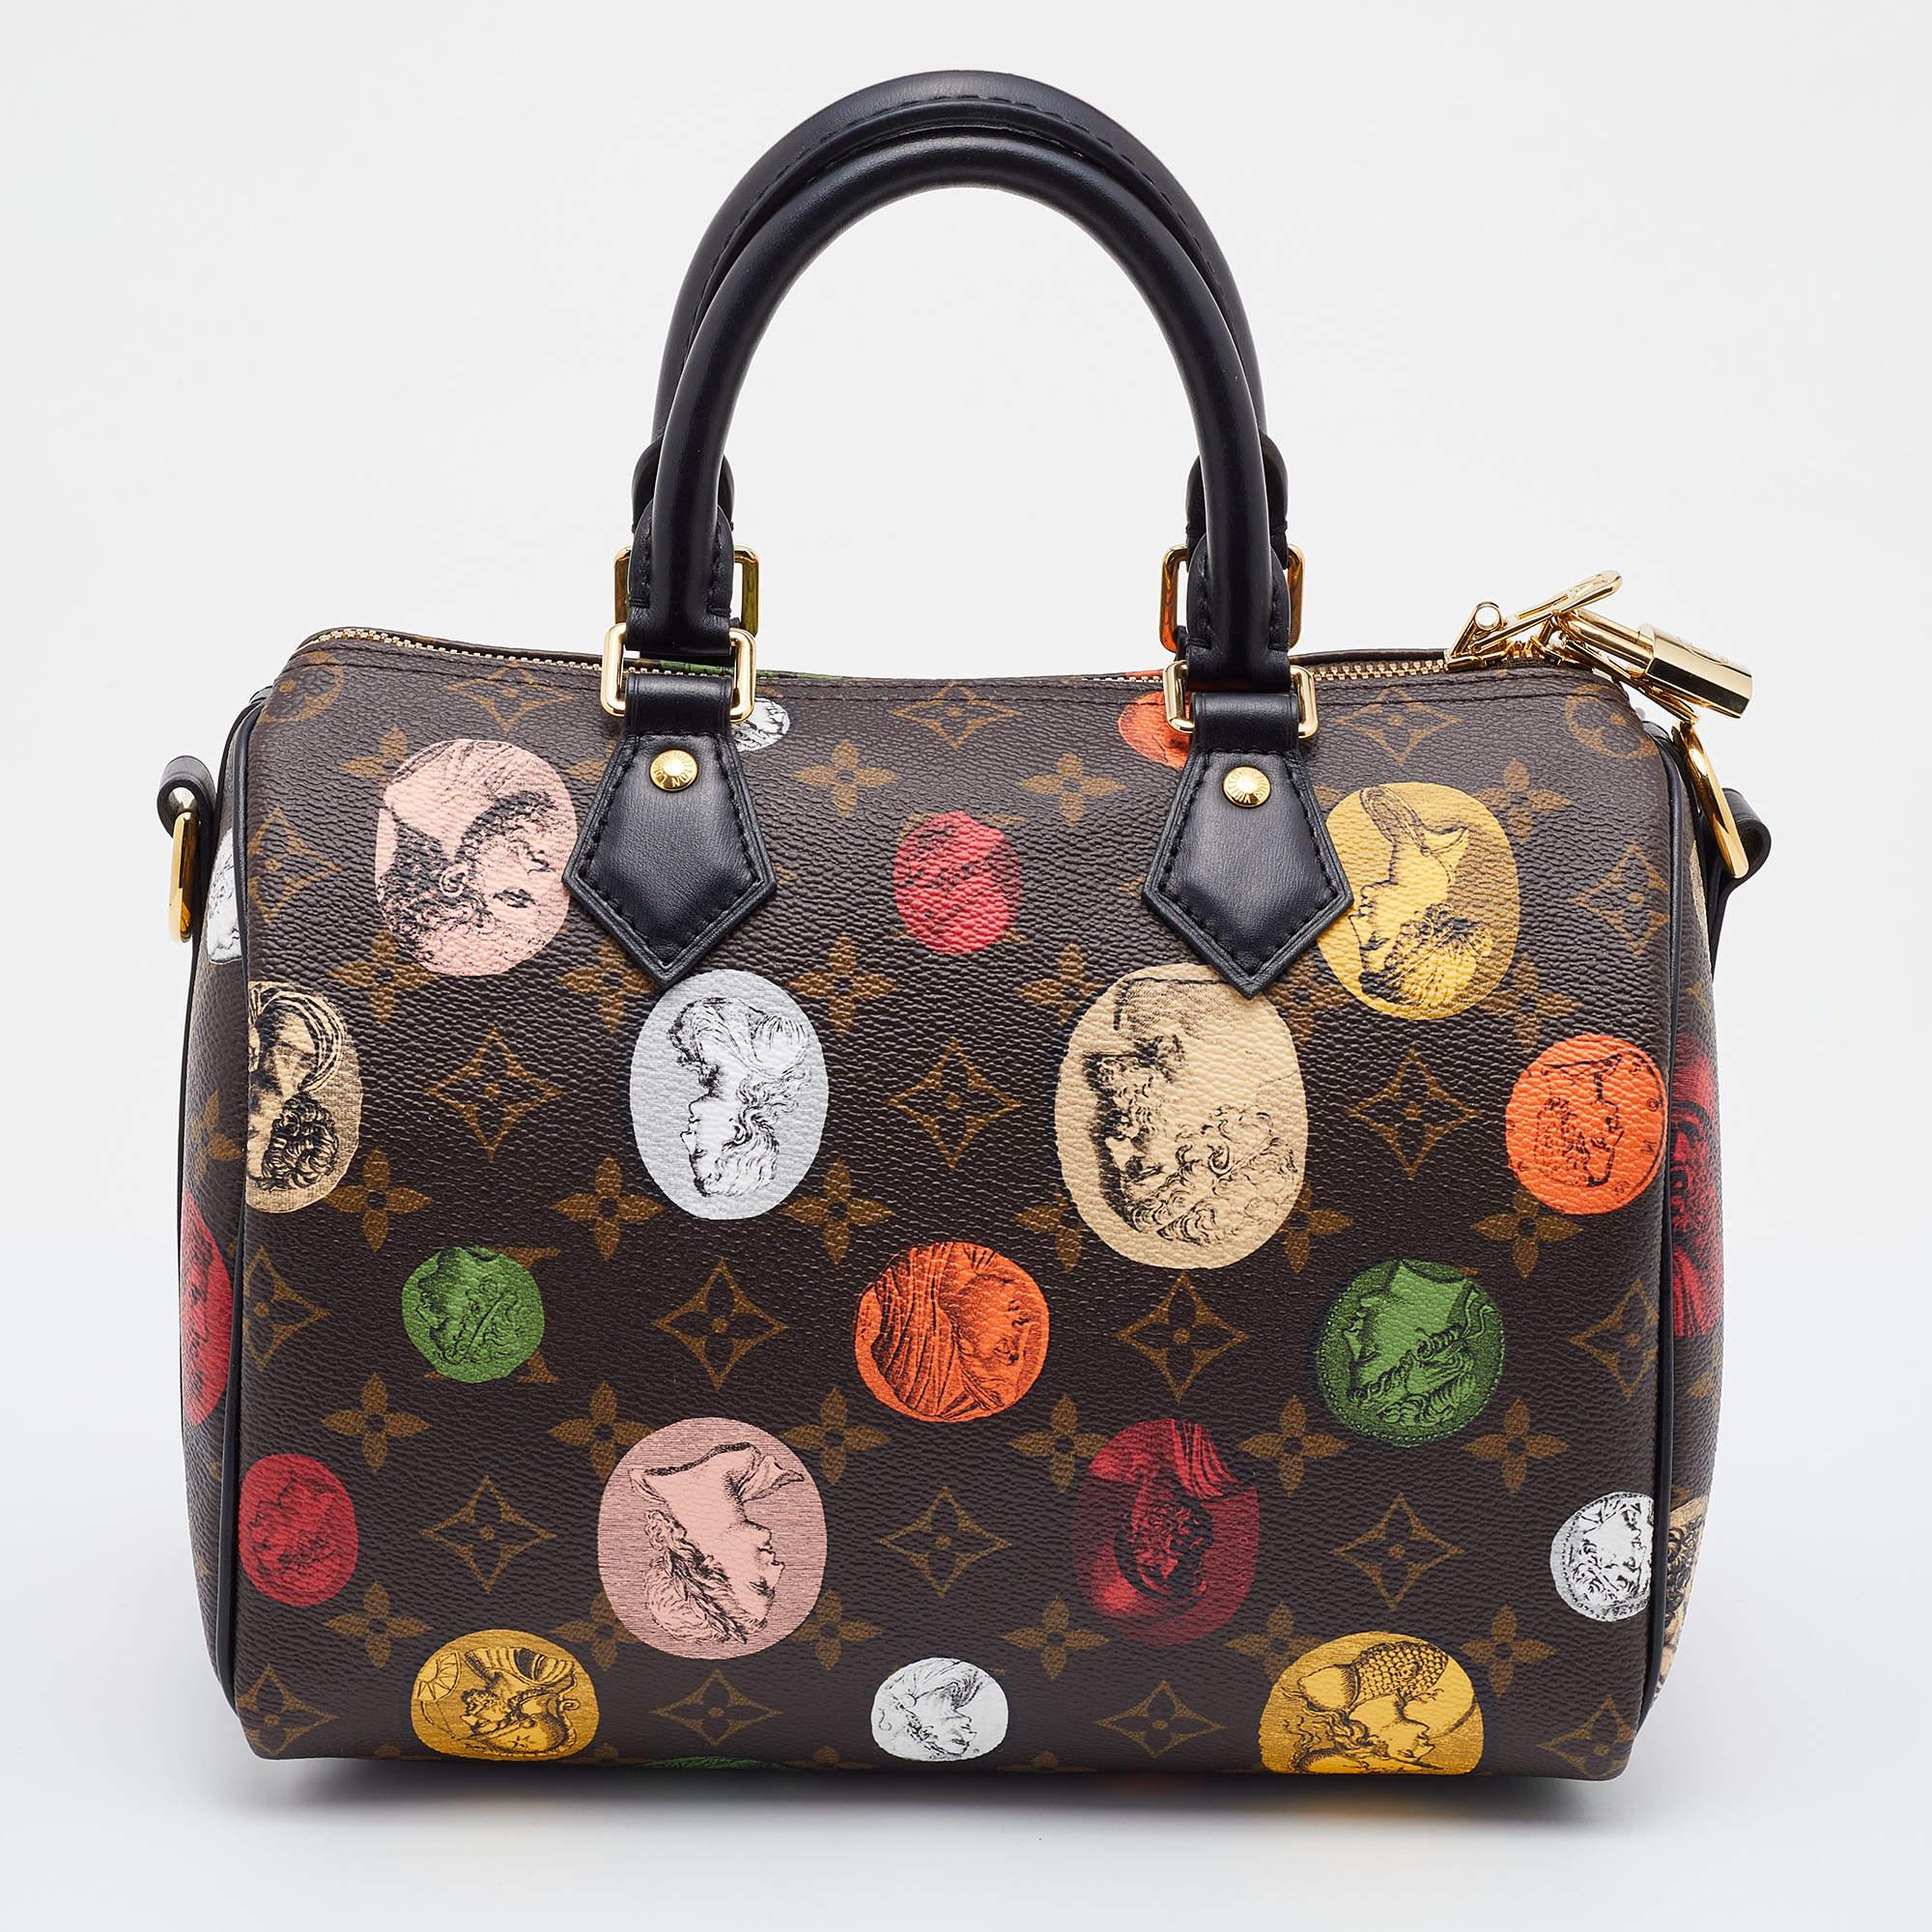 On LV's iconic Speedy, we witness prolific Italian artist Fornasetti's stunning artwork over the signature monogram prints. The Louis Vuitton X Fornasetti bag comes with dual handles, and eye-catching appeal, and an optional strap.

Includes: